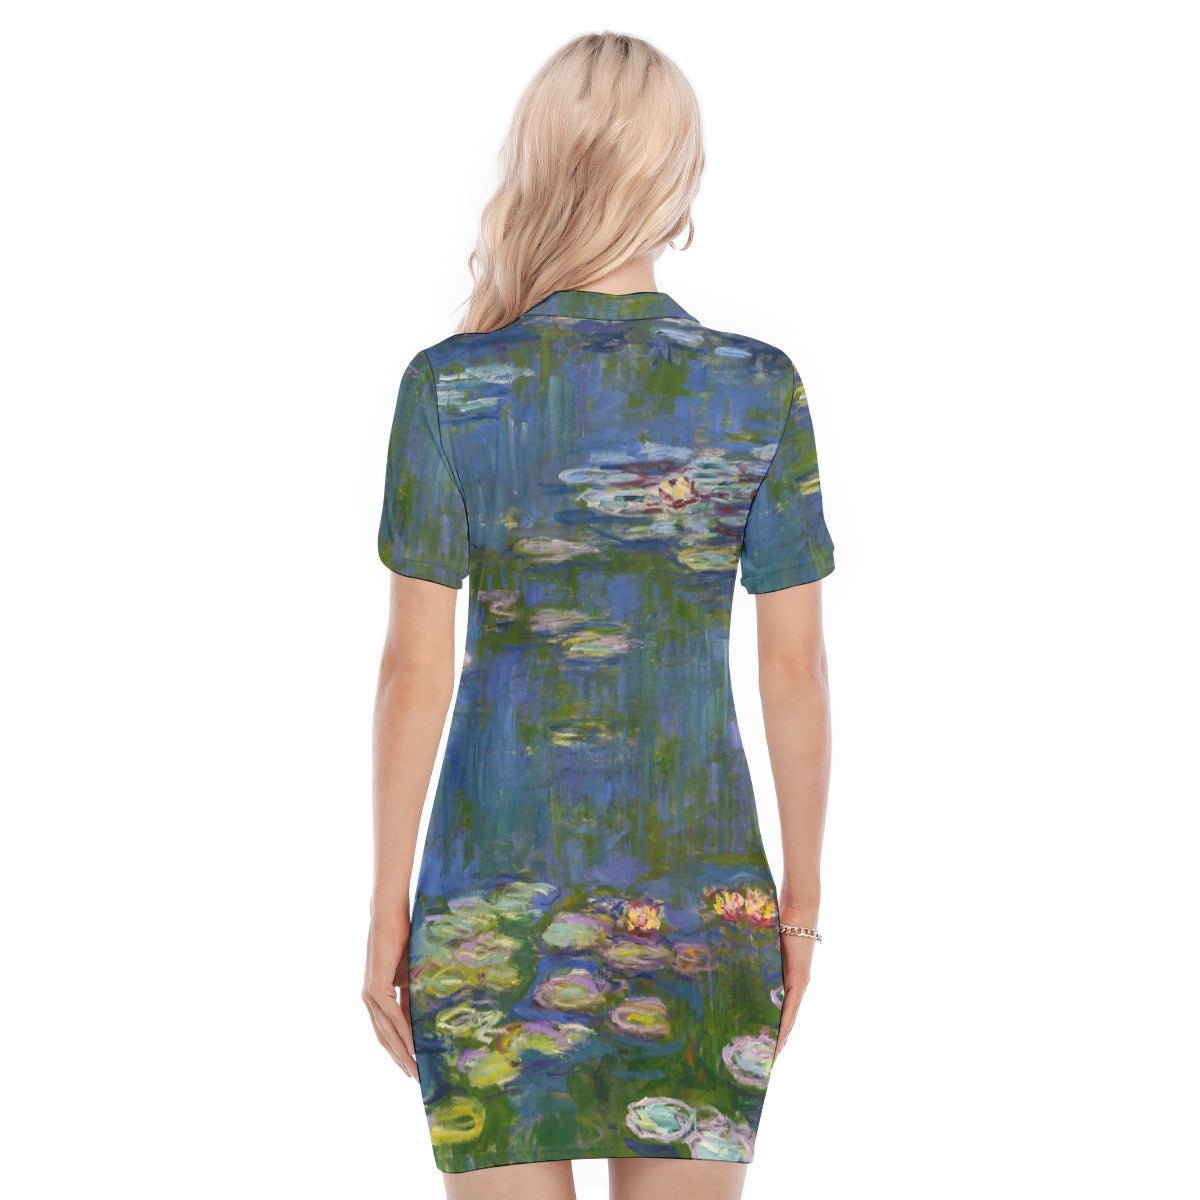 Artistic Women's Polo Collar Dress Inspired by Monet